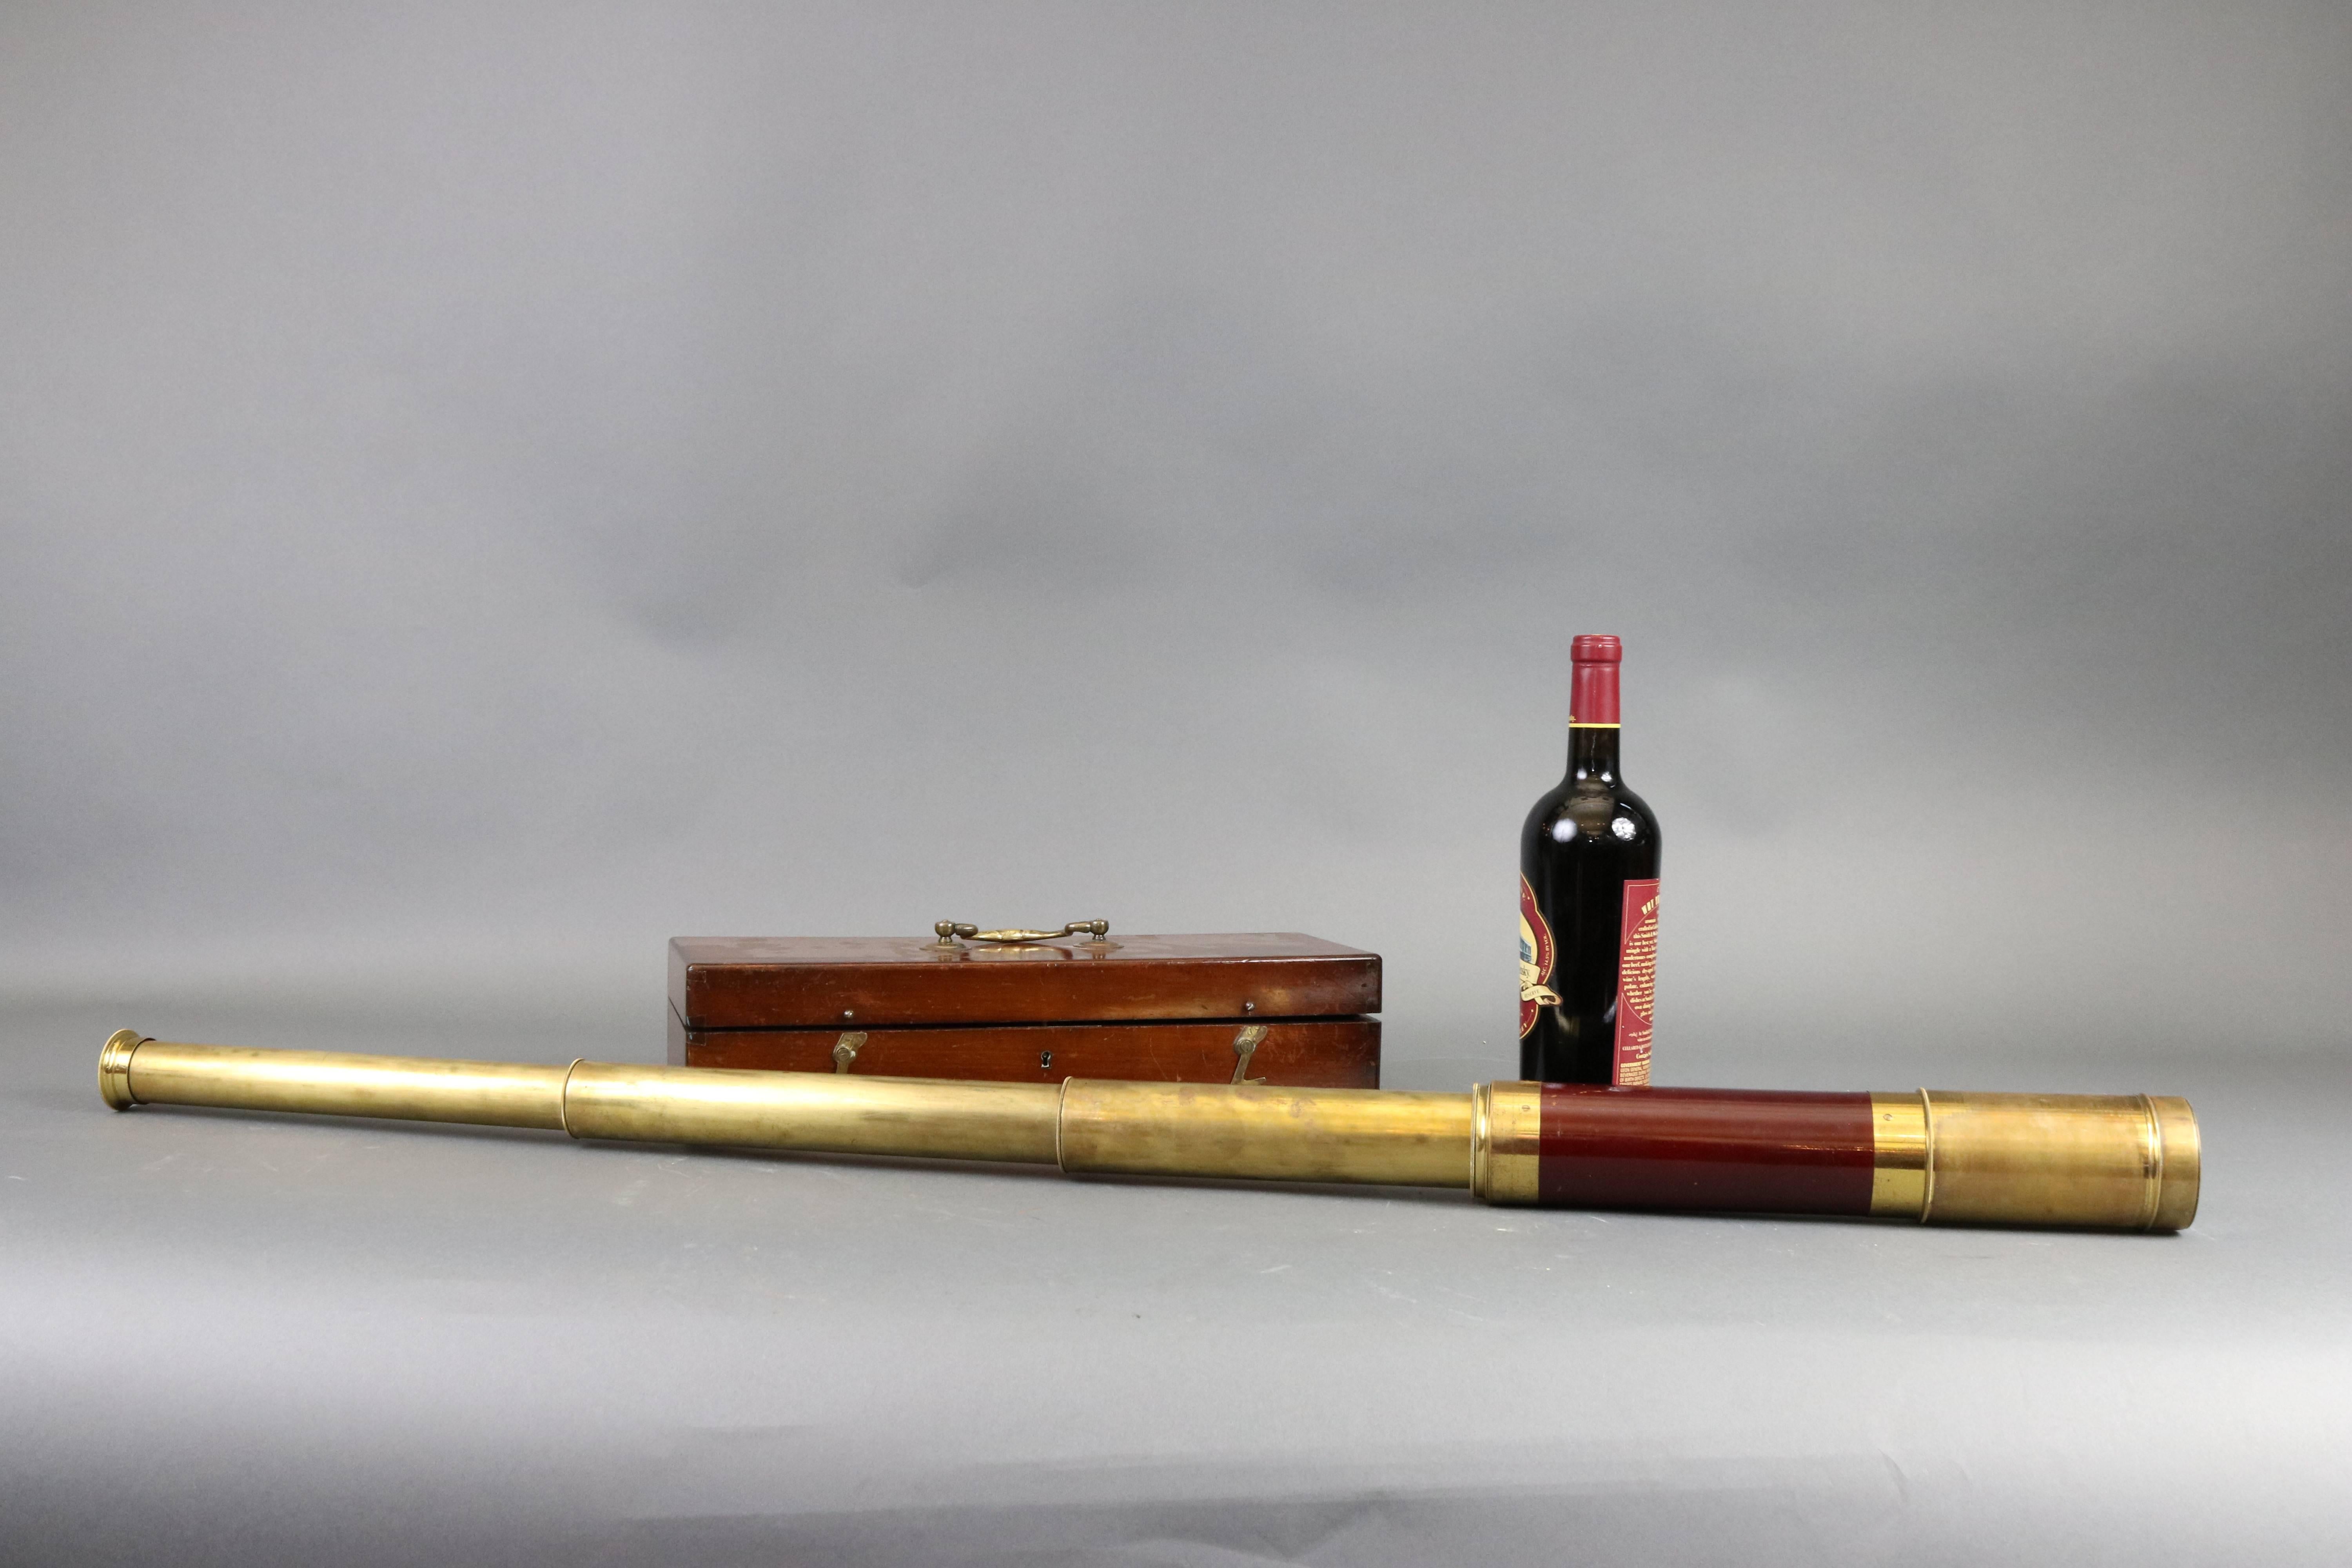 Late 18th-19th century three-draw spyglass signed "Maison de L'Ingr Chevalier Optique; Place du Pont Neuf 15, Paris" on the small focus tube. The spyglass has a wood body, brass end fittings, extending shade, lens covers, and secondary